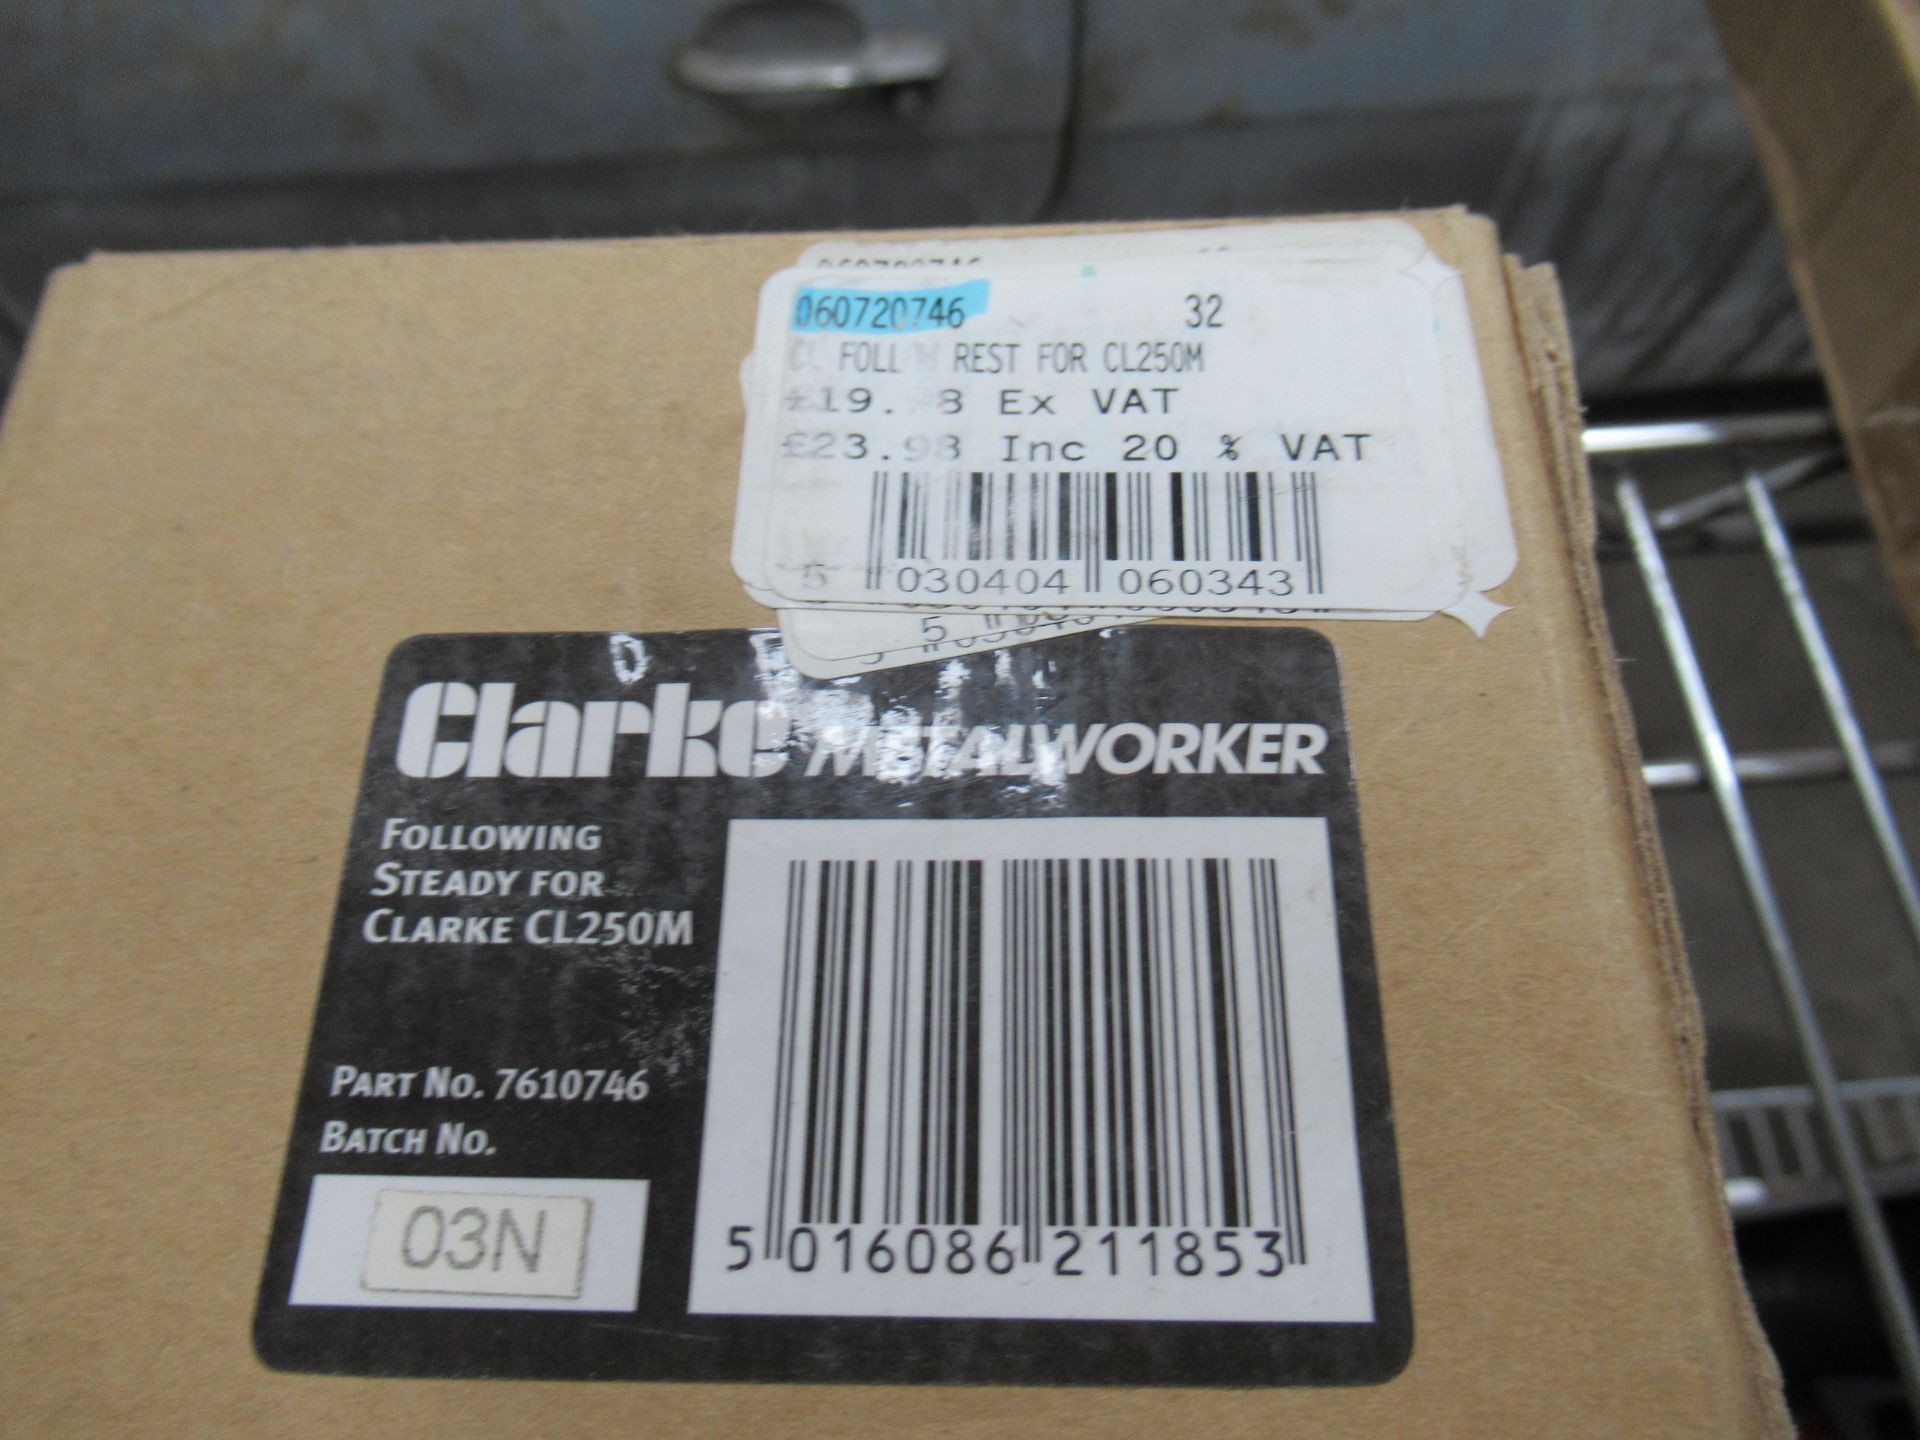 Clarke CL250M spares including mill chuck set, follow rest, face plate and fixed steady - Image 3 of 5